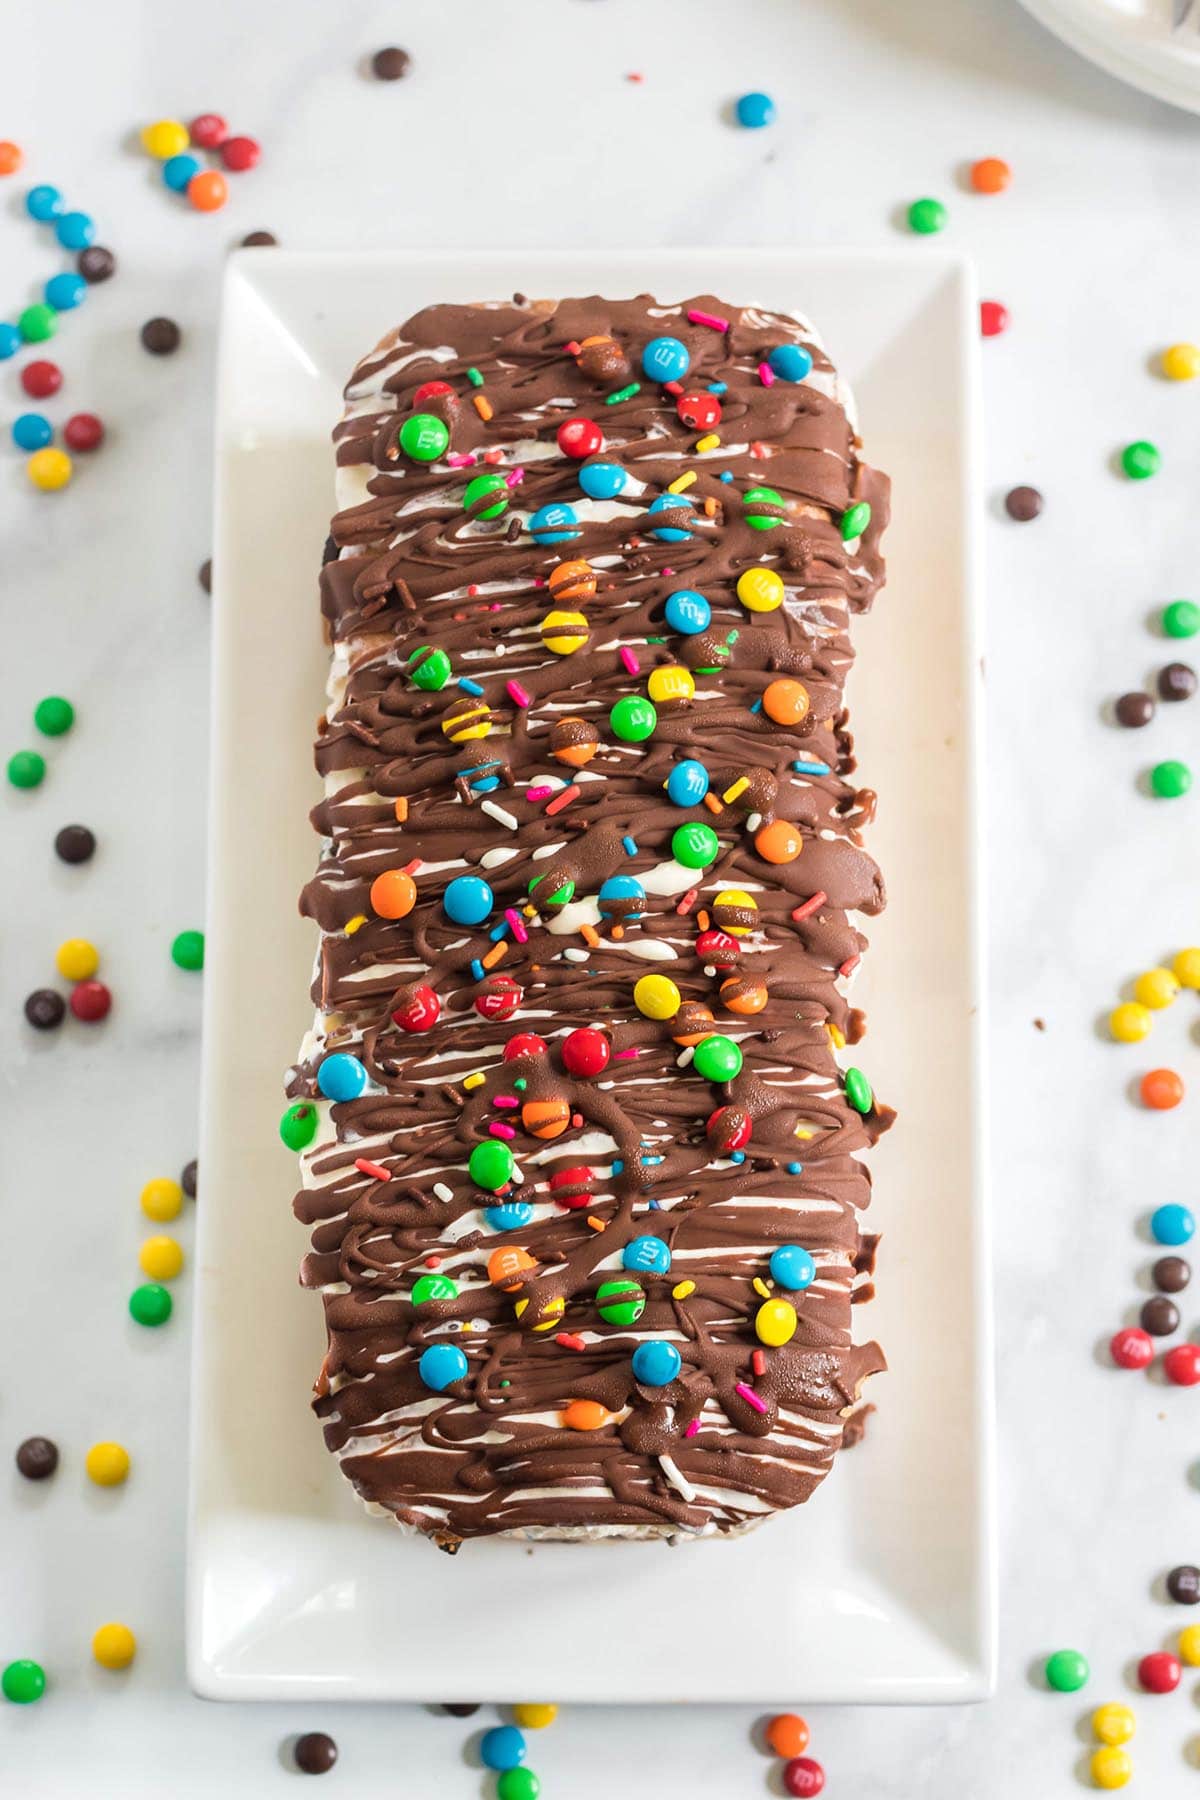 ice cream cake topped with chocolate sauce and mini m&m's.